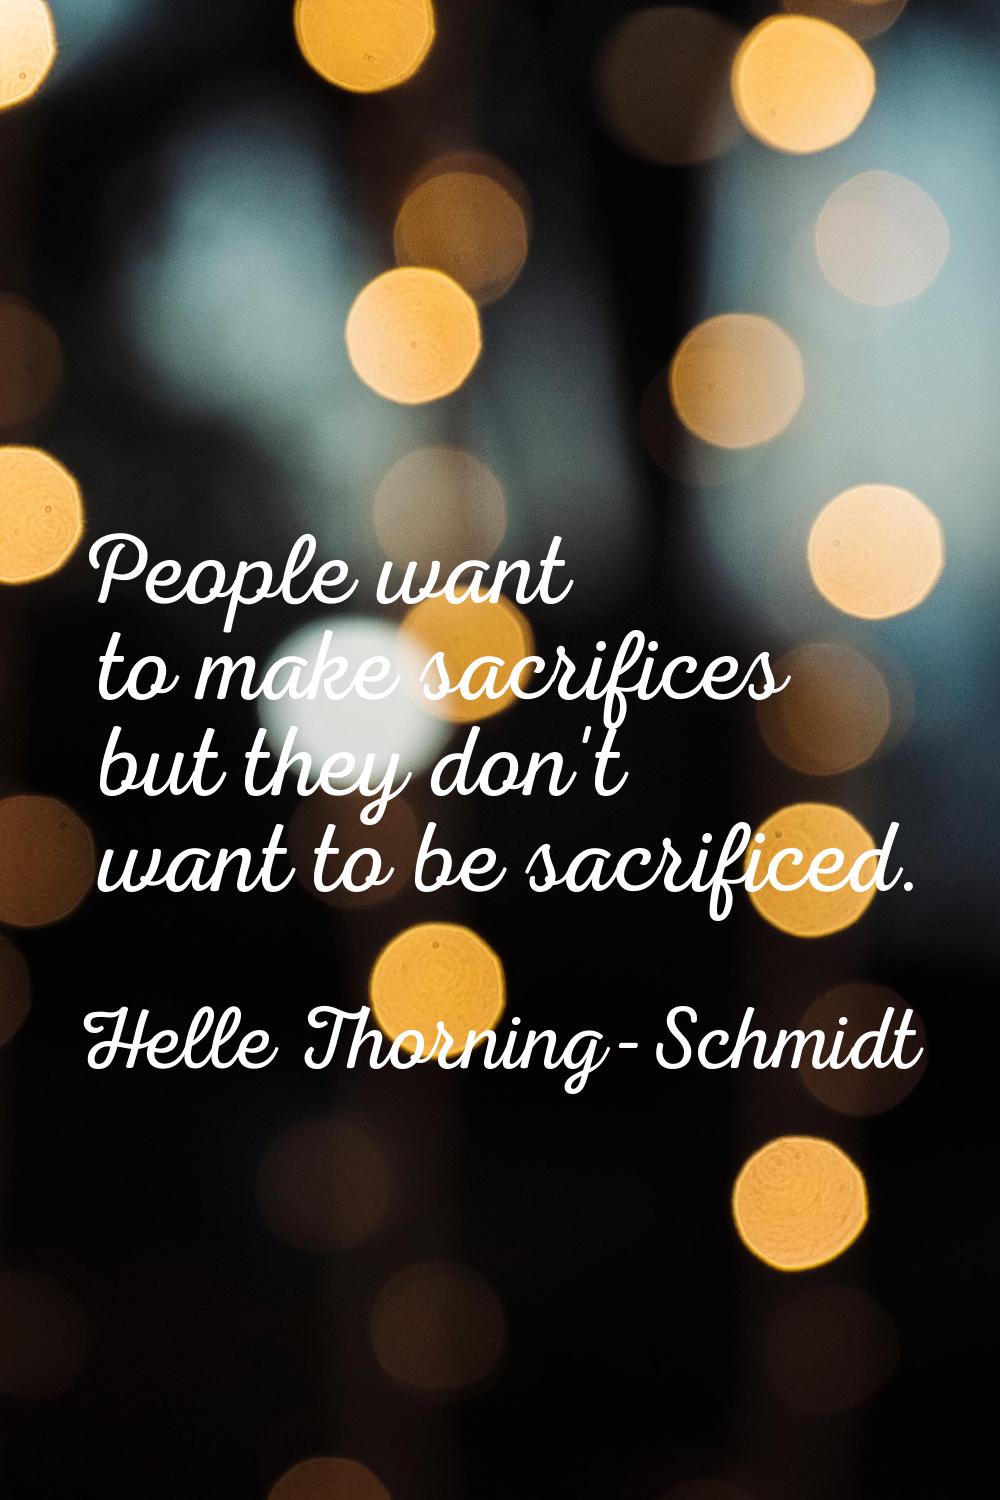 People want to make sacrifices but they don't want to be sacrificed.